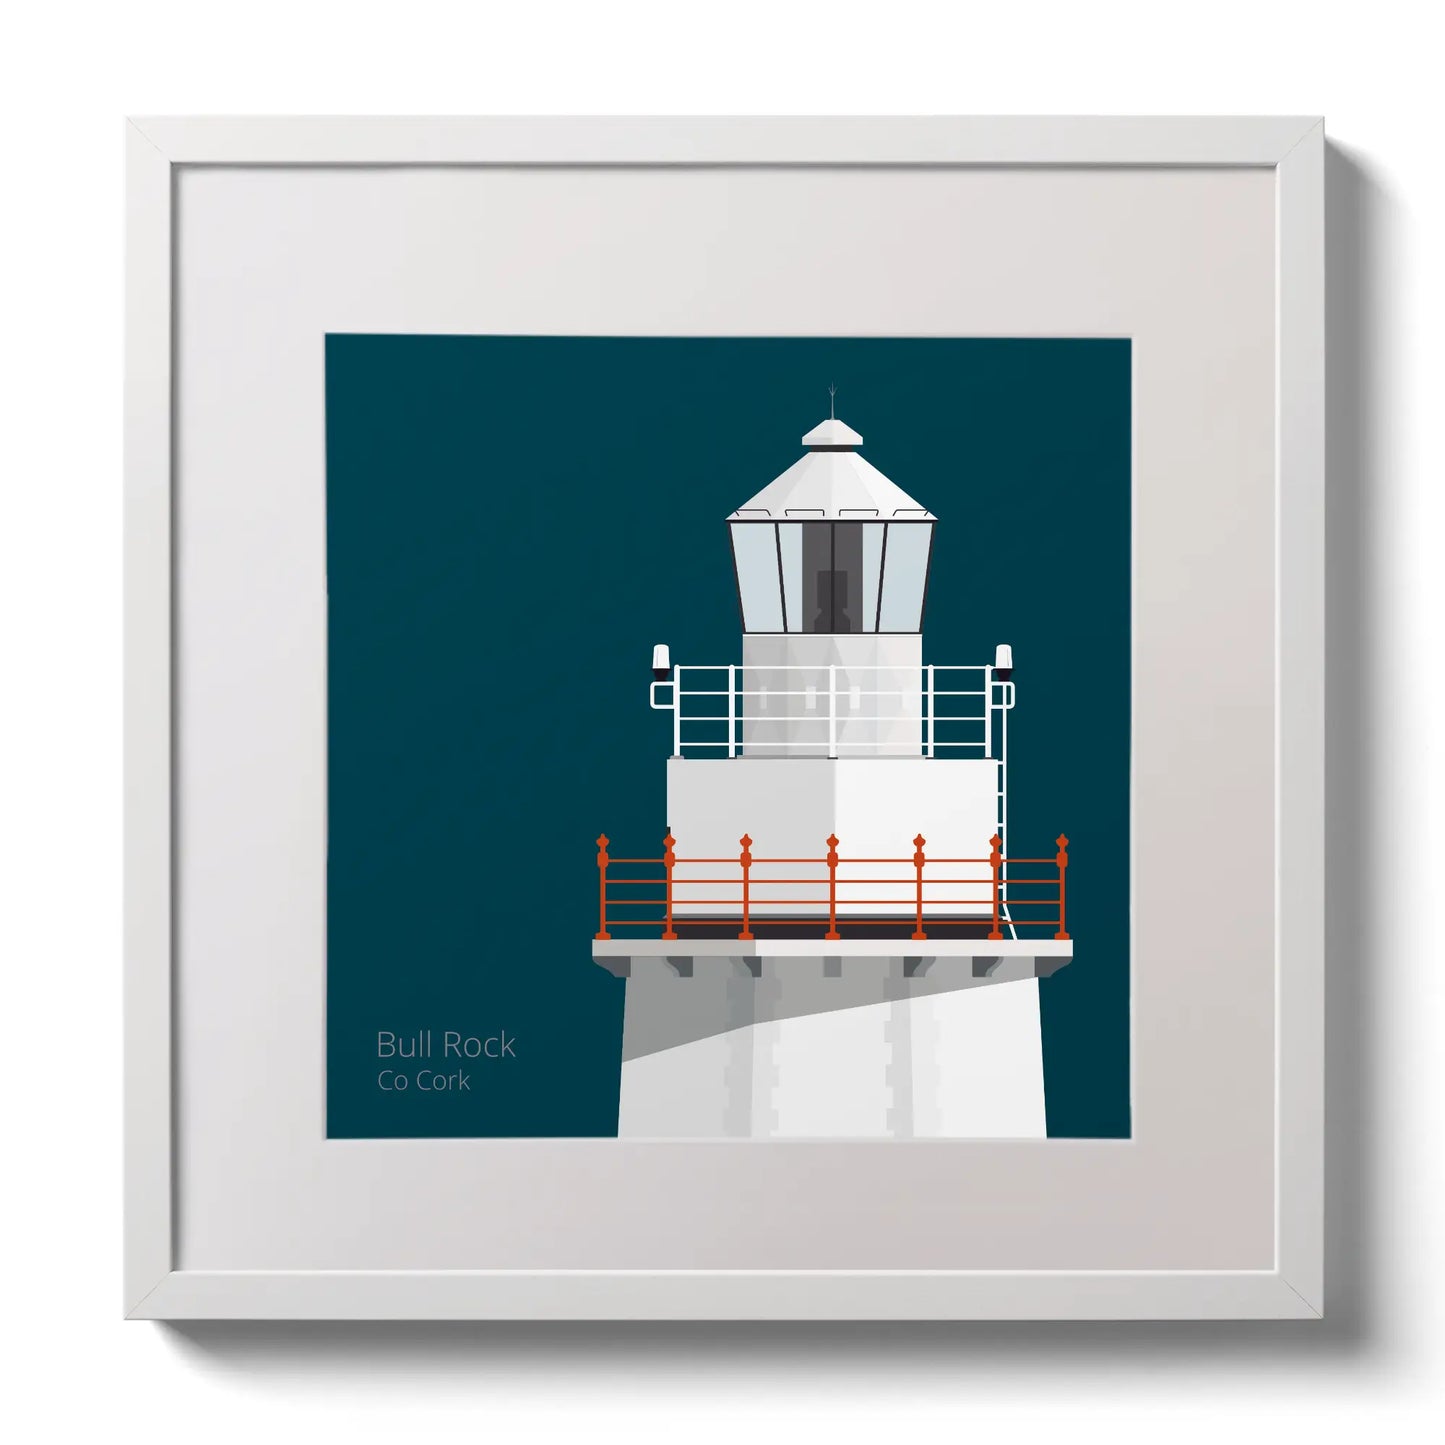 Illustration of Bull Rock lighthouse on a midnight blue background,  in a white square frame measuring 30x30cm.